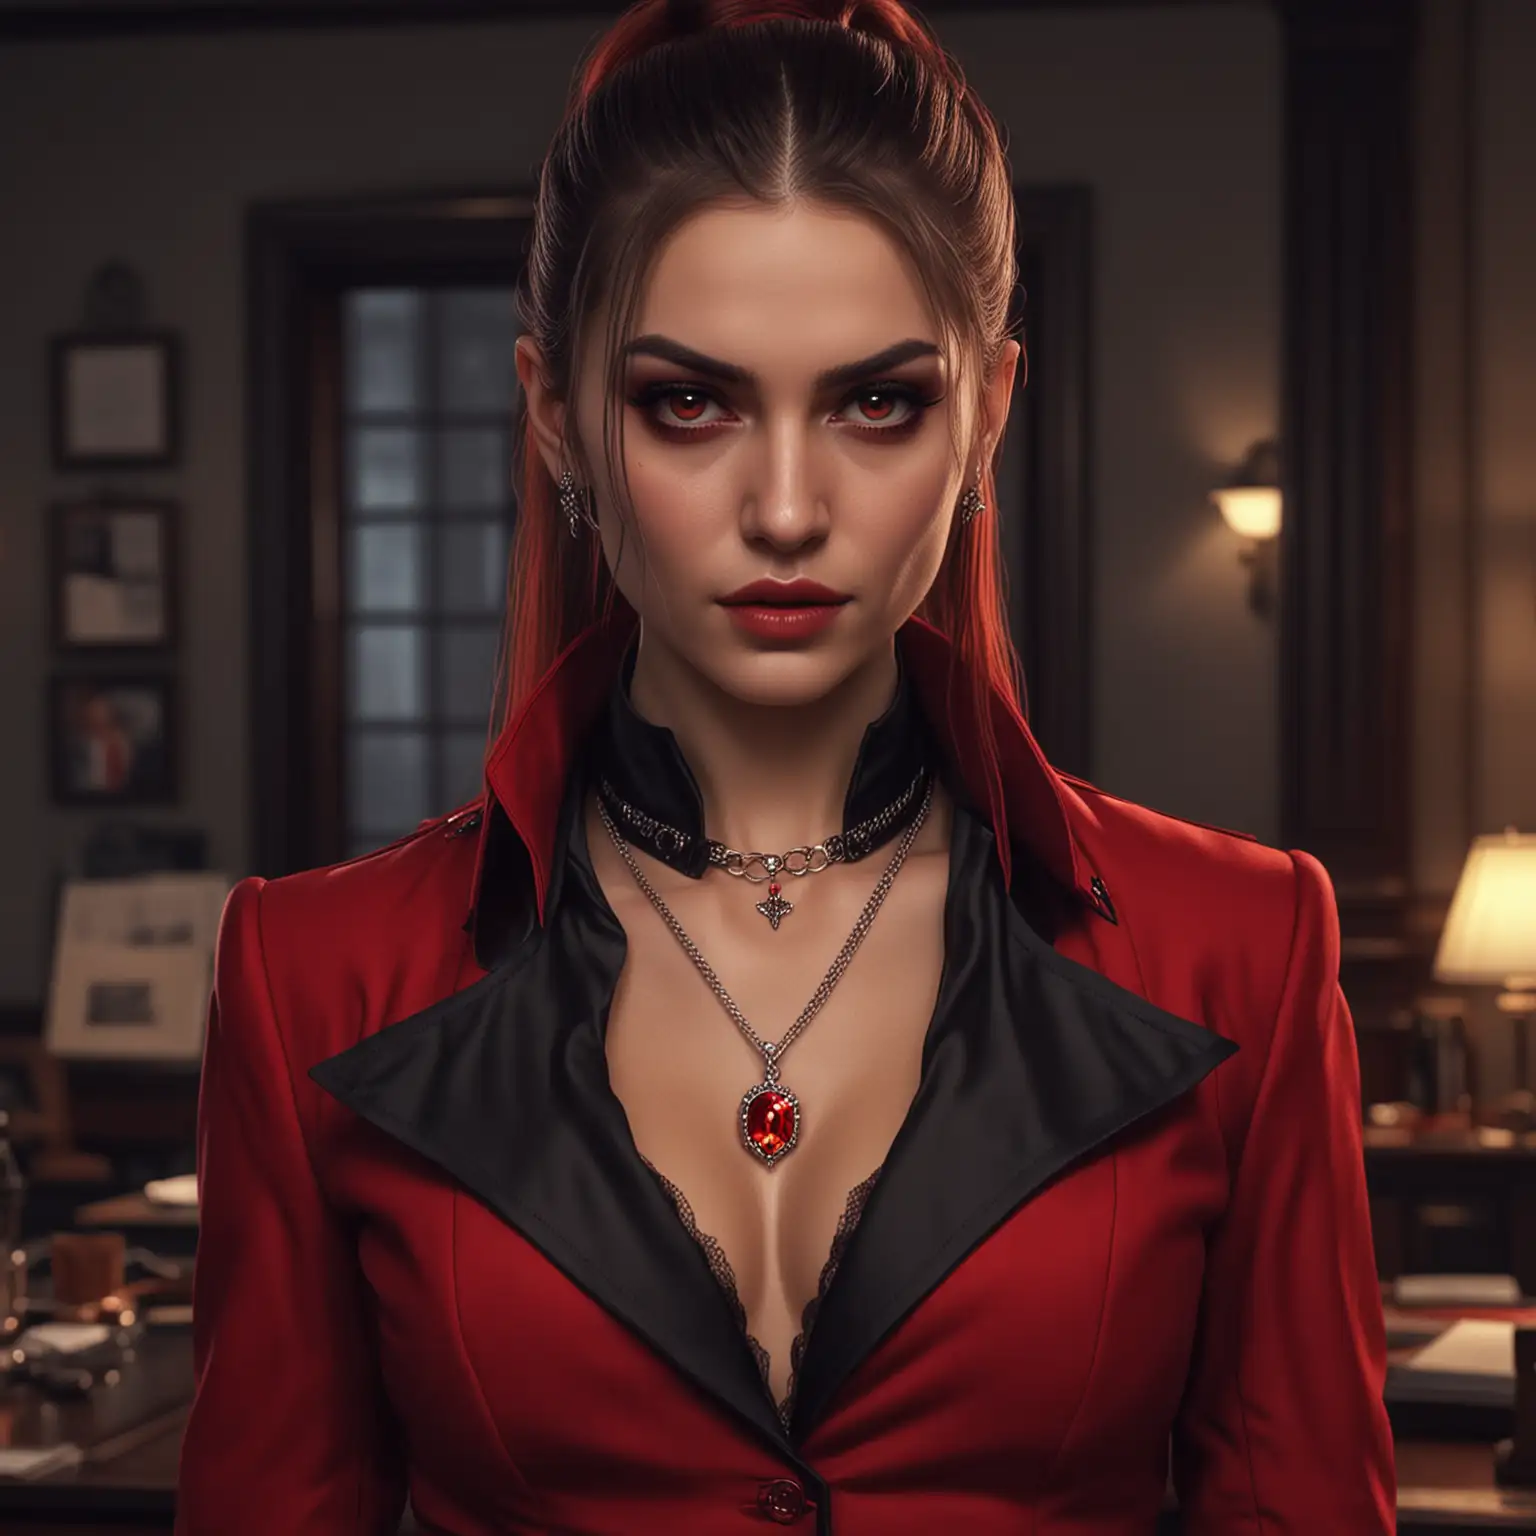 Vampiress Toreador in Mafia Office Nighttime Realism with Red Theme